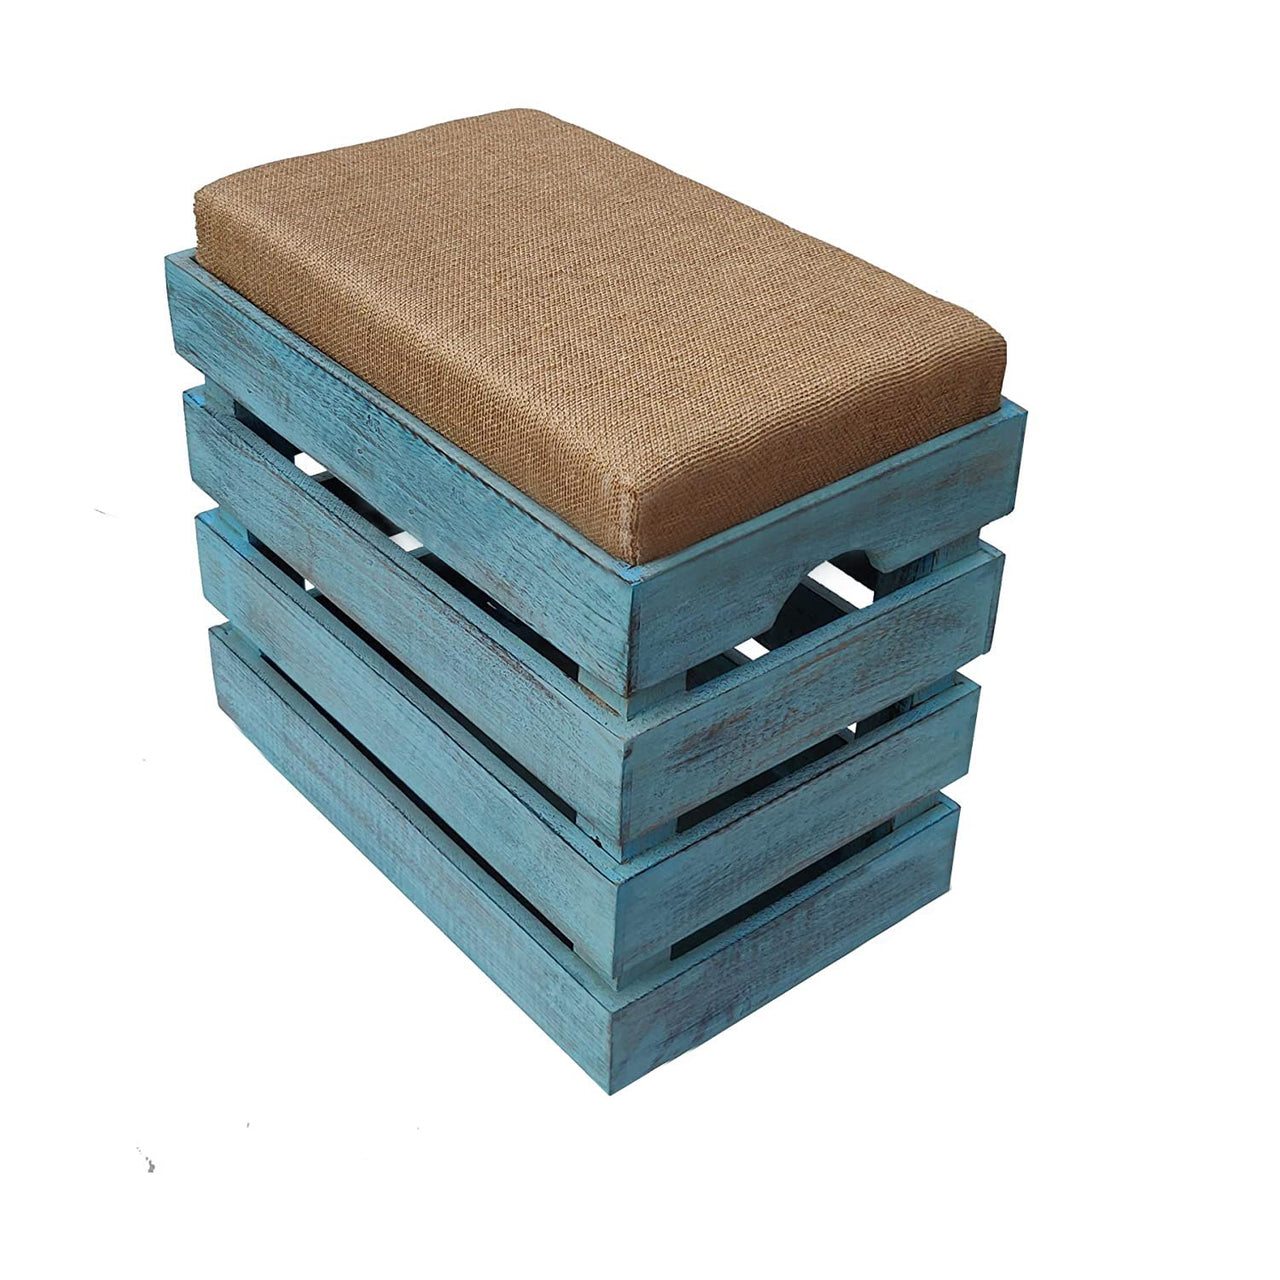 Wooden Stool/Foot Stool/Collapsible Storage Stool/Office Stool/Stool for Kitchen/Wooden Stool Dime Store